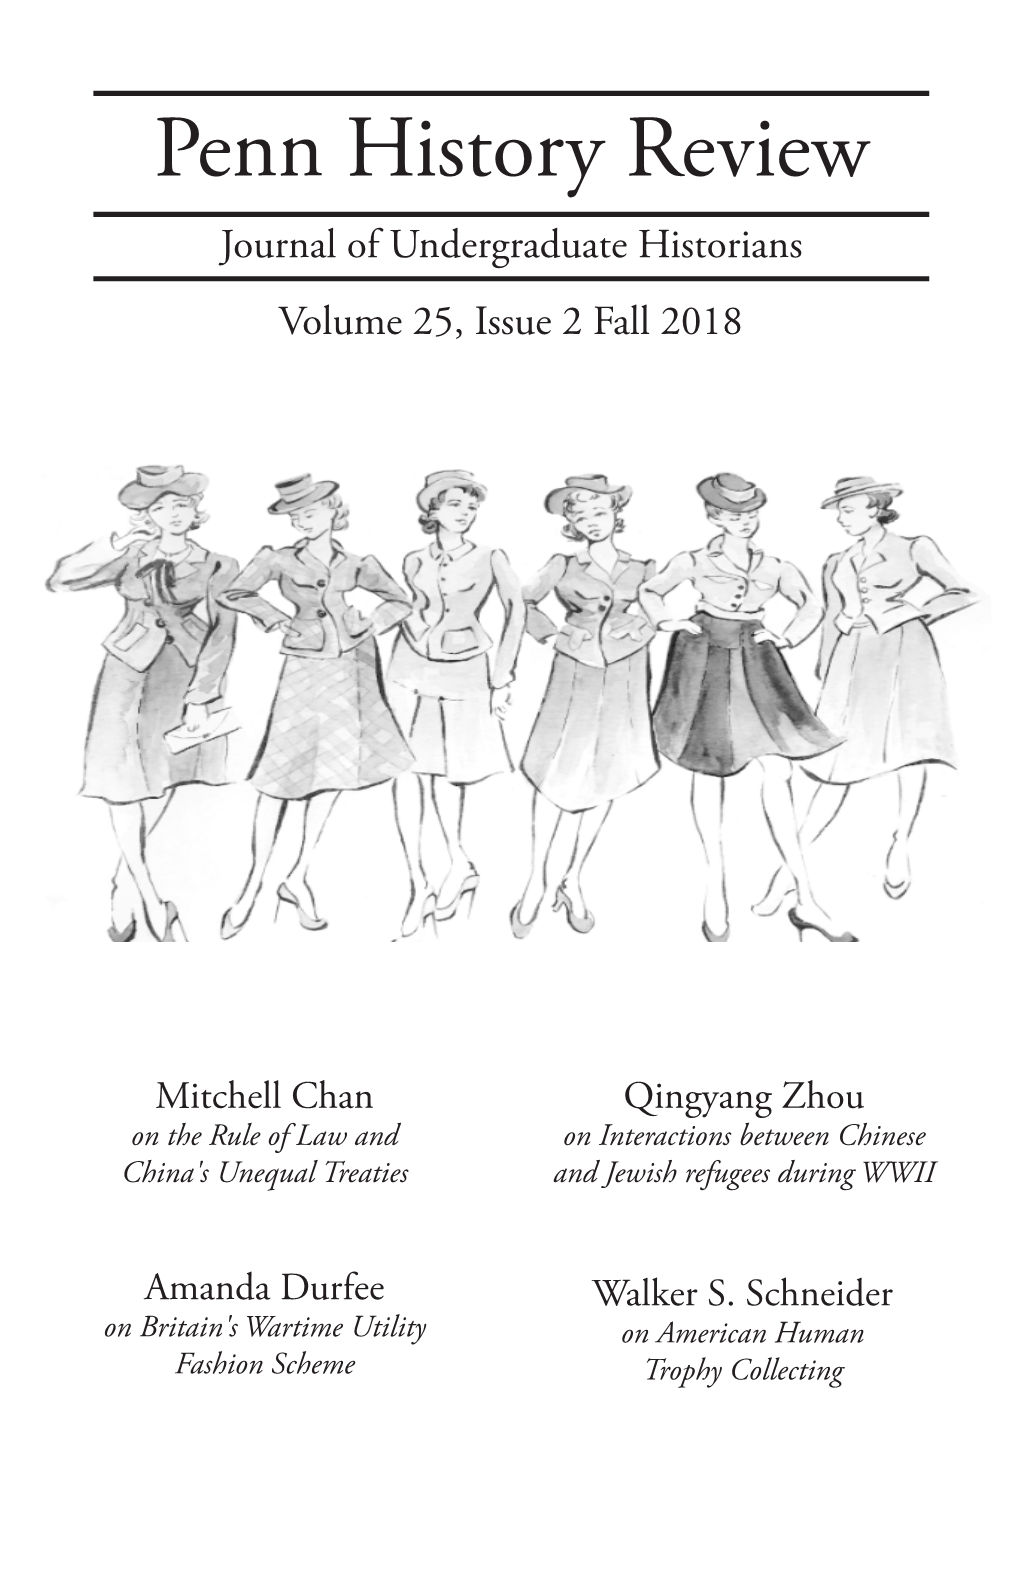 Penn History Review Journal of Undergraduate Historians Volume 25, Issue 2 Fall 2018